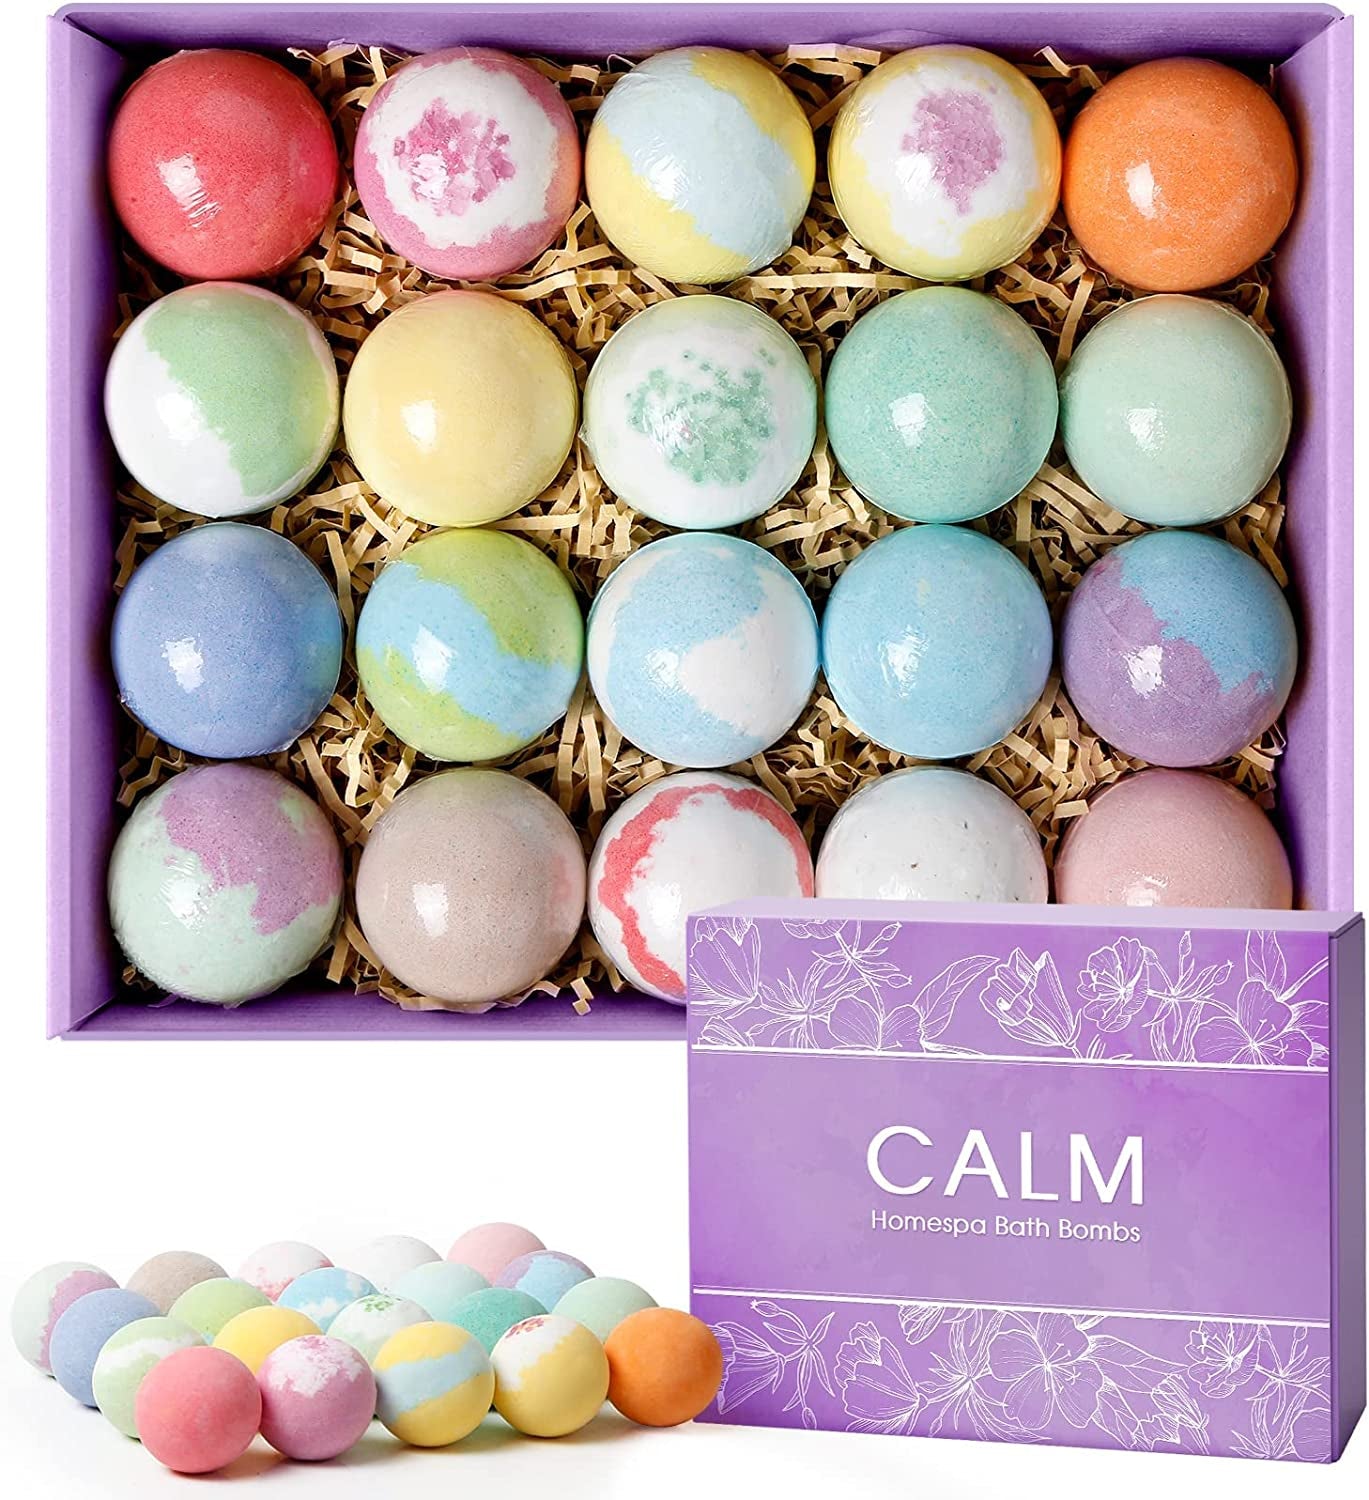 Bath Bombs for Women Gift Set 20Pcs Natural Wonderful Fizz Effect Bath Bomb for Bubble & Spa Bath Amazing Gift for Her/Him, Women, Wife, Girlfriend, Mother